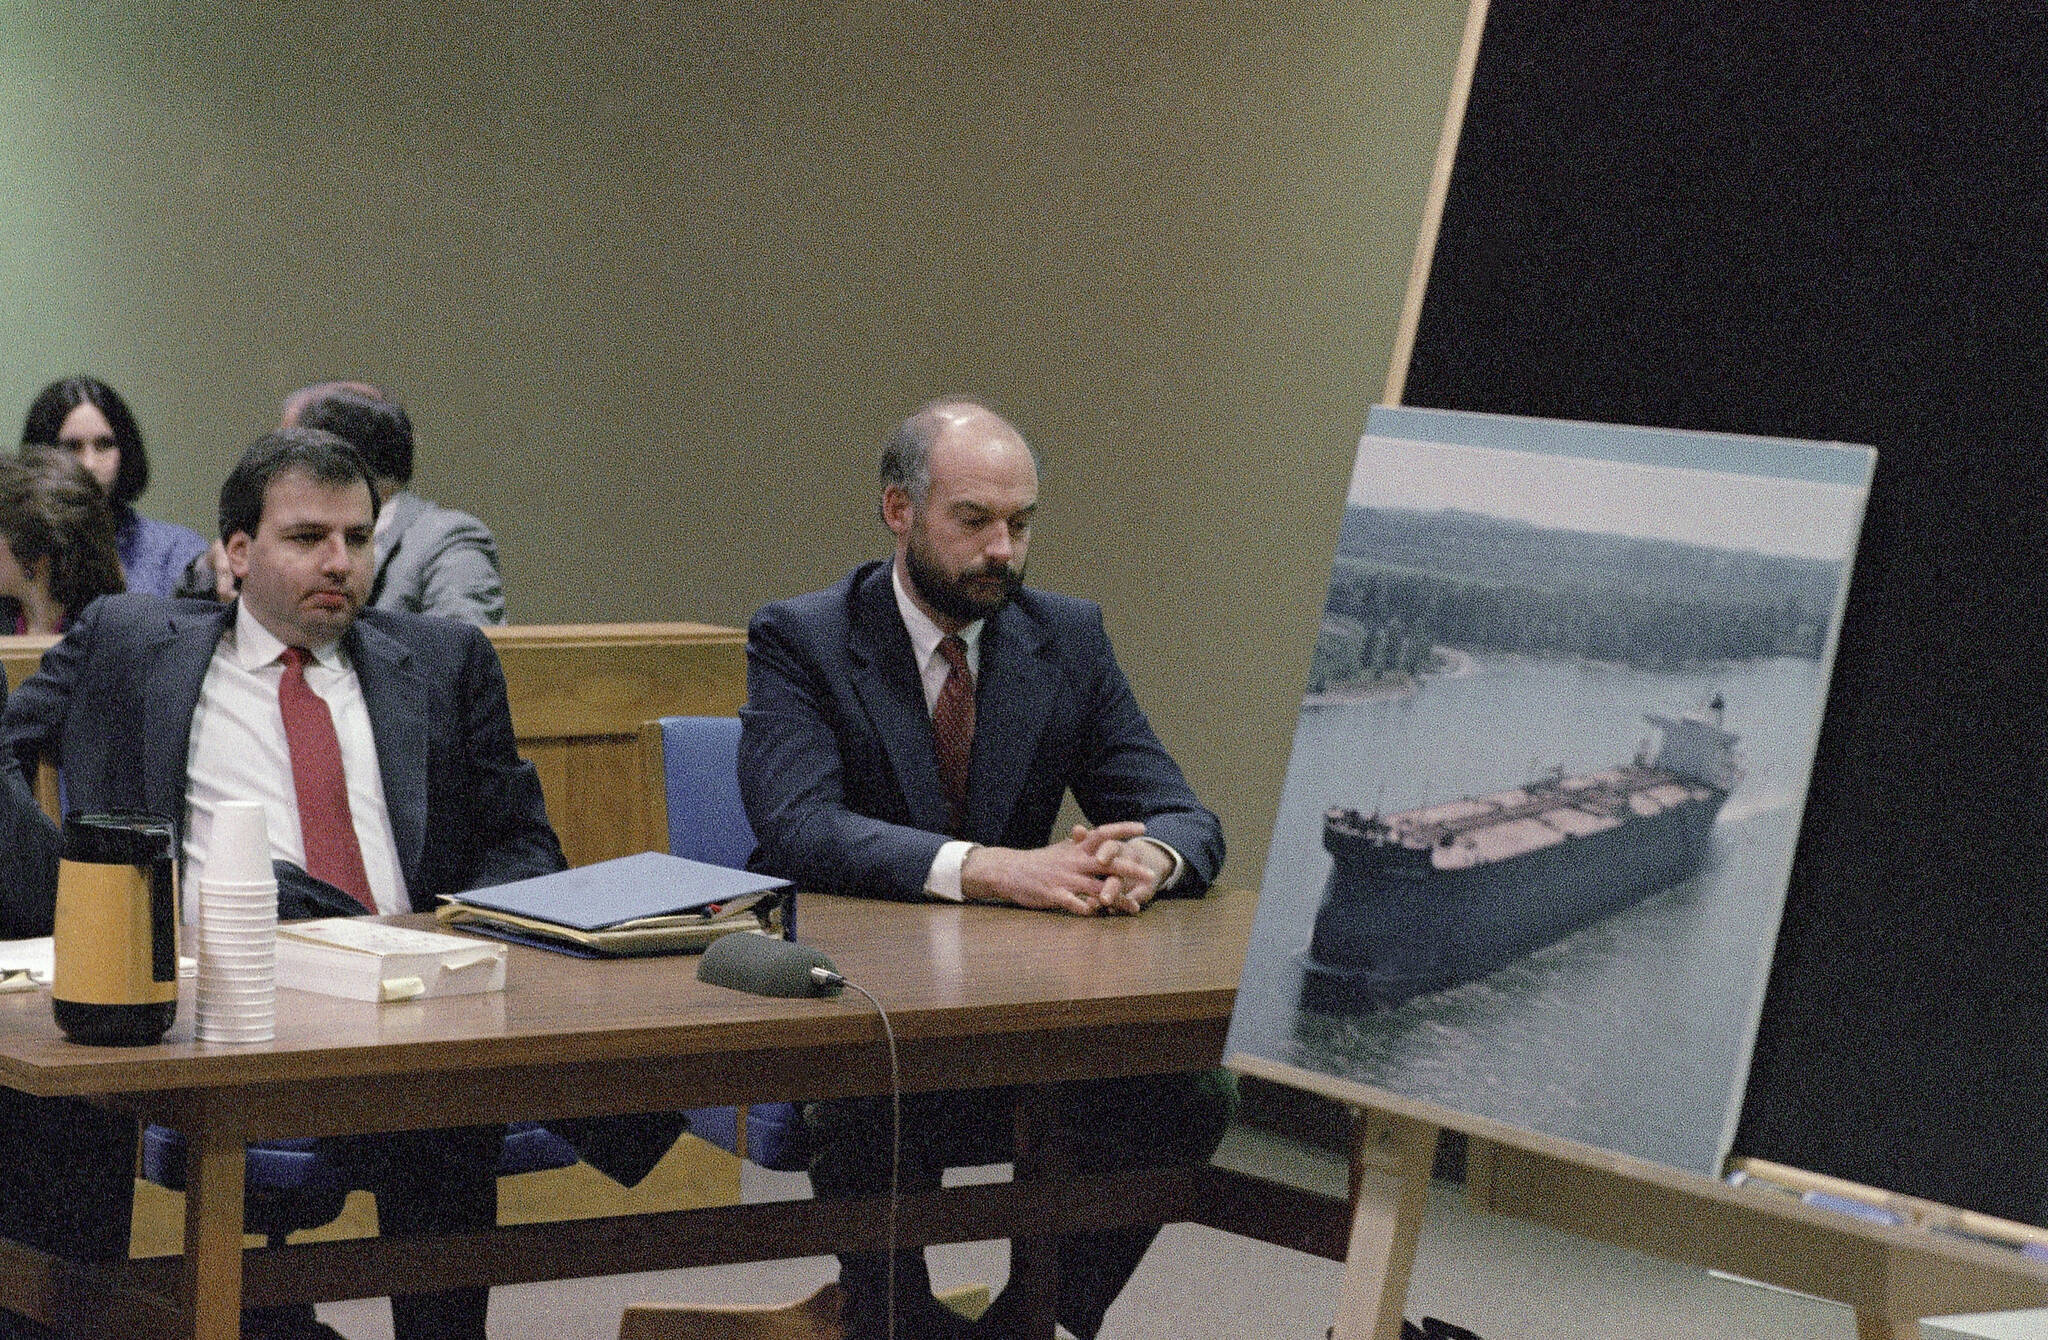 Fired Exxon Valdez skipper Joseph Hazelwood, right, sits with his lawyer Michael Chalos as a photograph of the tanker is displayed on an easel in Anchorage Superior Court, March 20, 1990. Hazelwood, the captain of the Exxon Valdez oil tanker that ran aground more than three decades ago in Alaska, causing one of the worst oil spills in U.S. history, has died in July 2022, the New York Times reported. He was 75. (AP File Photo / Jack Smith)